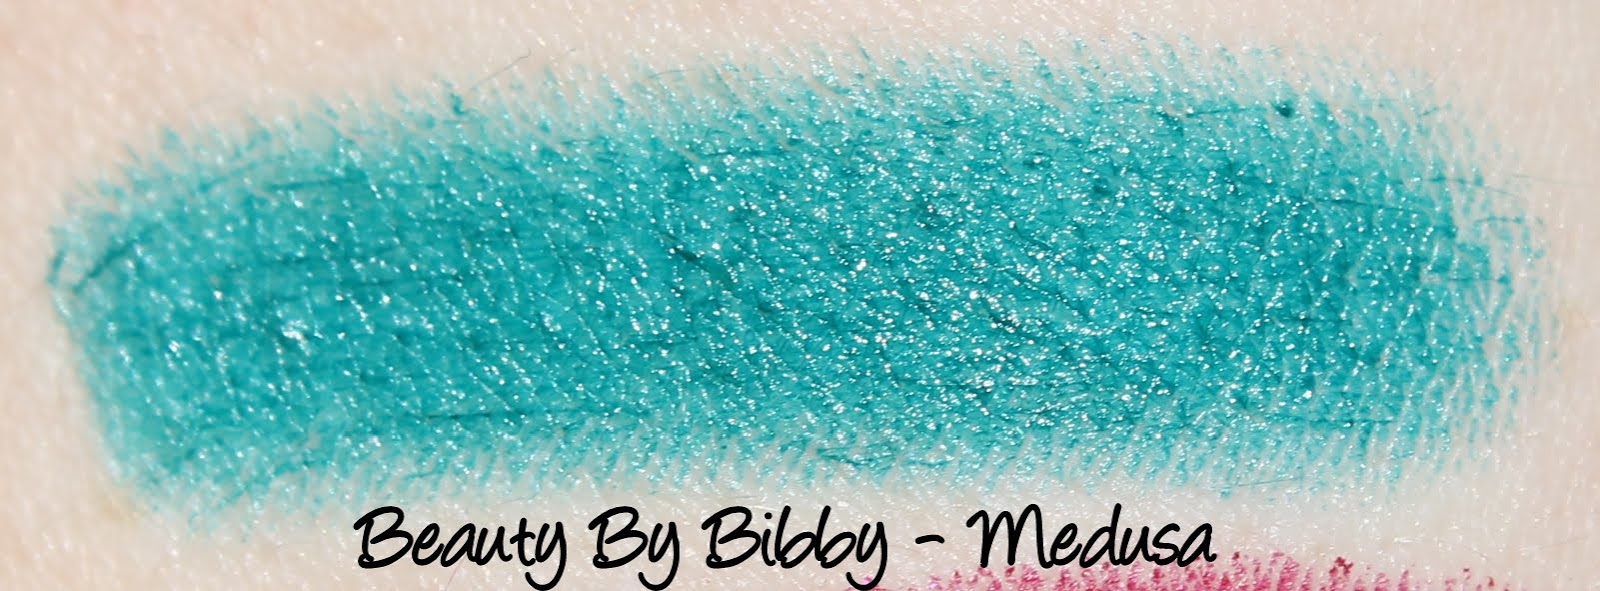 Beauty By Bibby Lipsticks - Poisoned and Medusa Swatches & Review